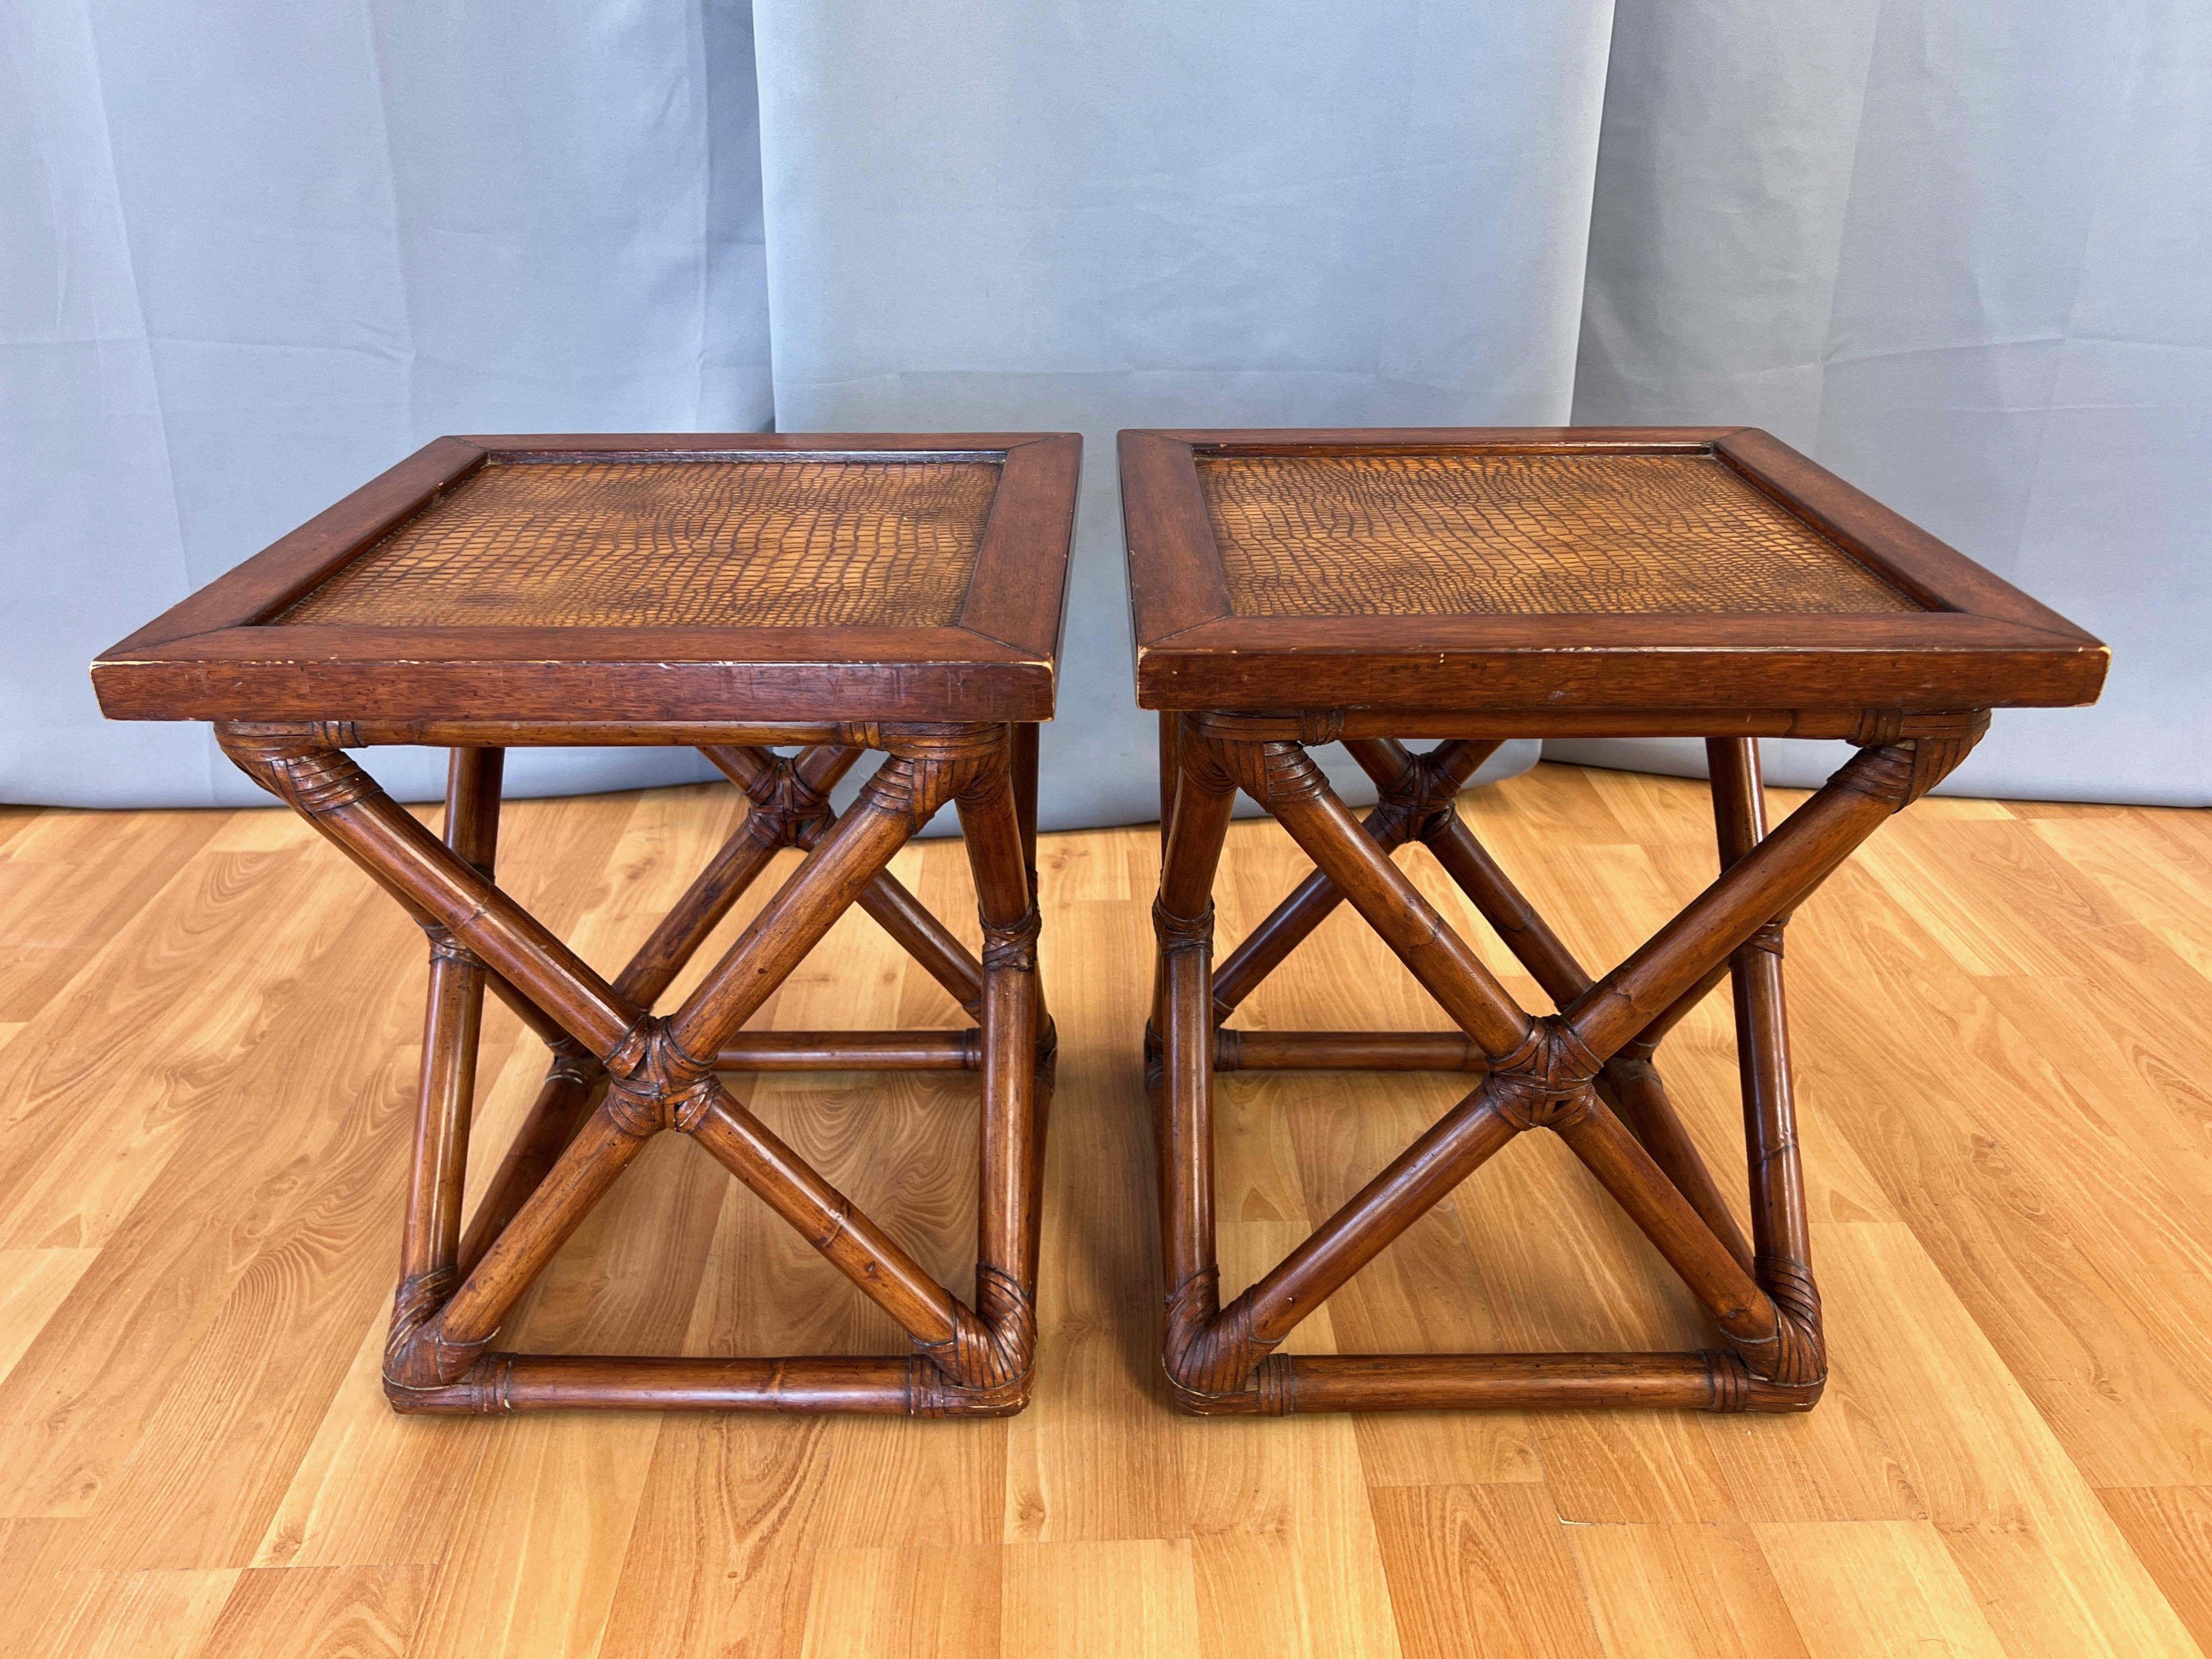 Pair of Palecek Rattan End Tables with Faux Crocodile Leather Tops, c. 2010 For Sale 7